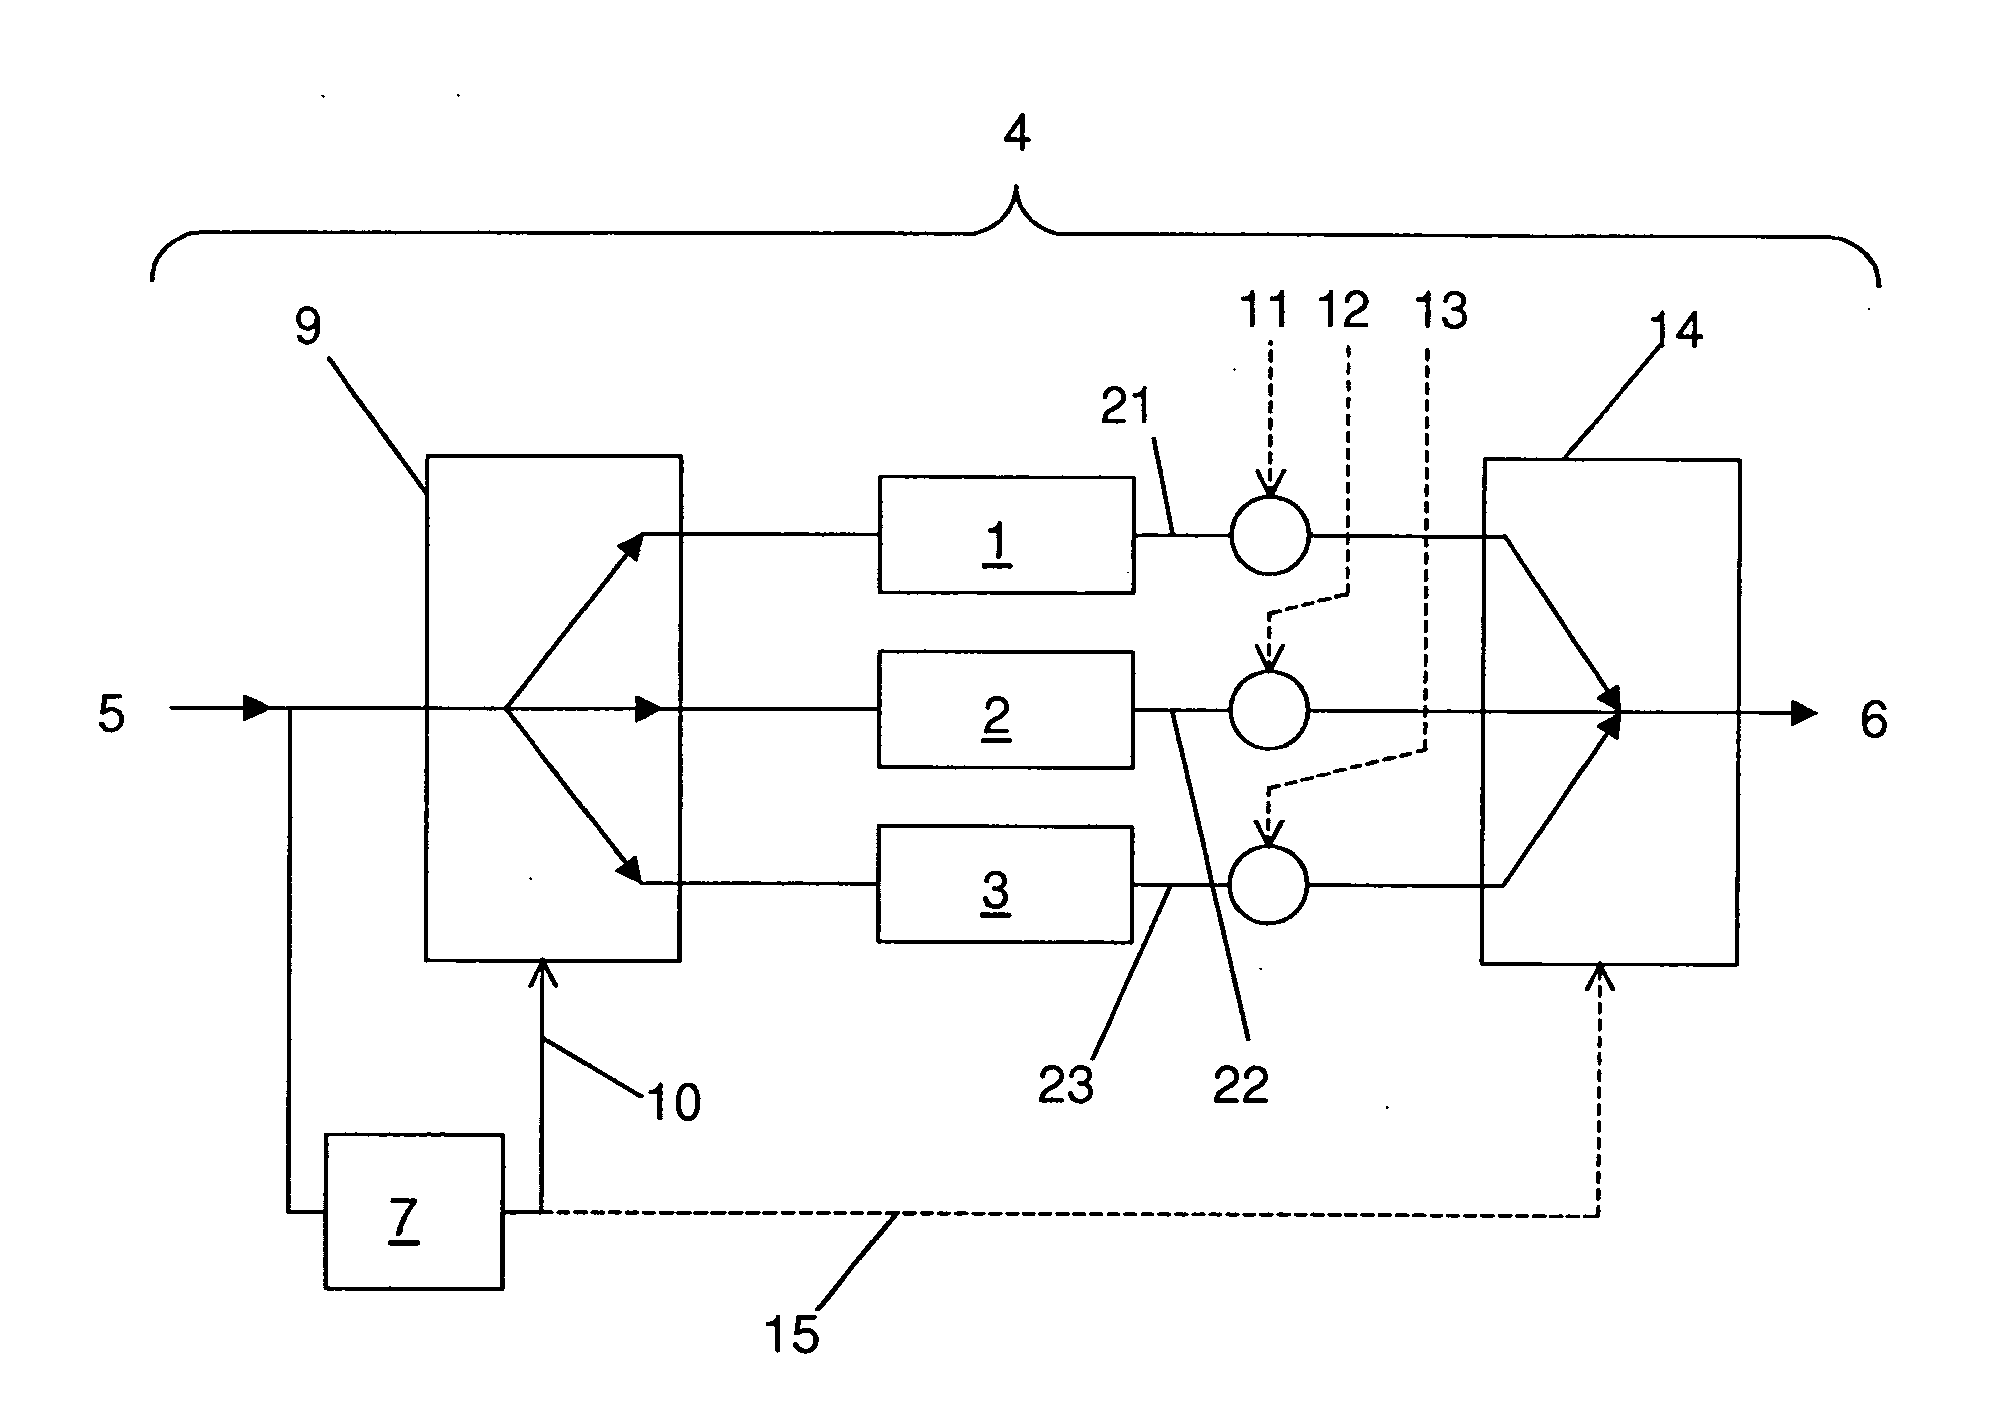 Evaluation Circuit for Processing Digital Signals, Method, and Sensor Assembly